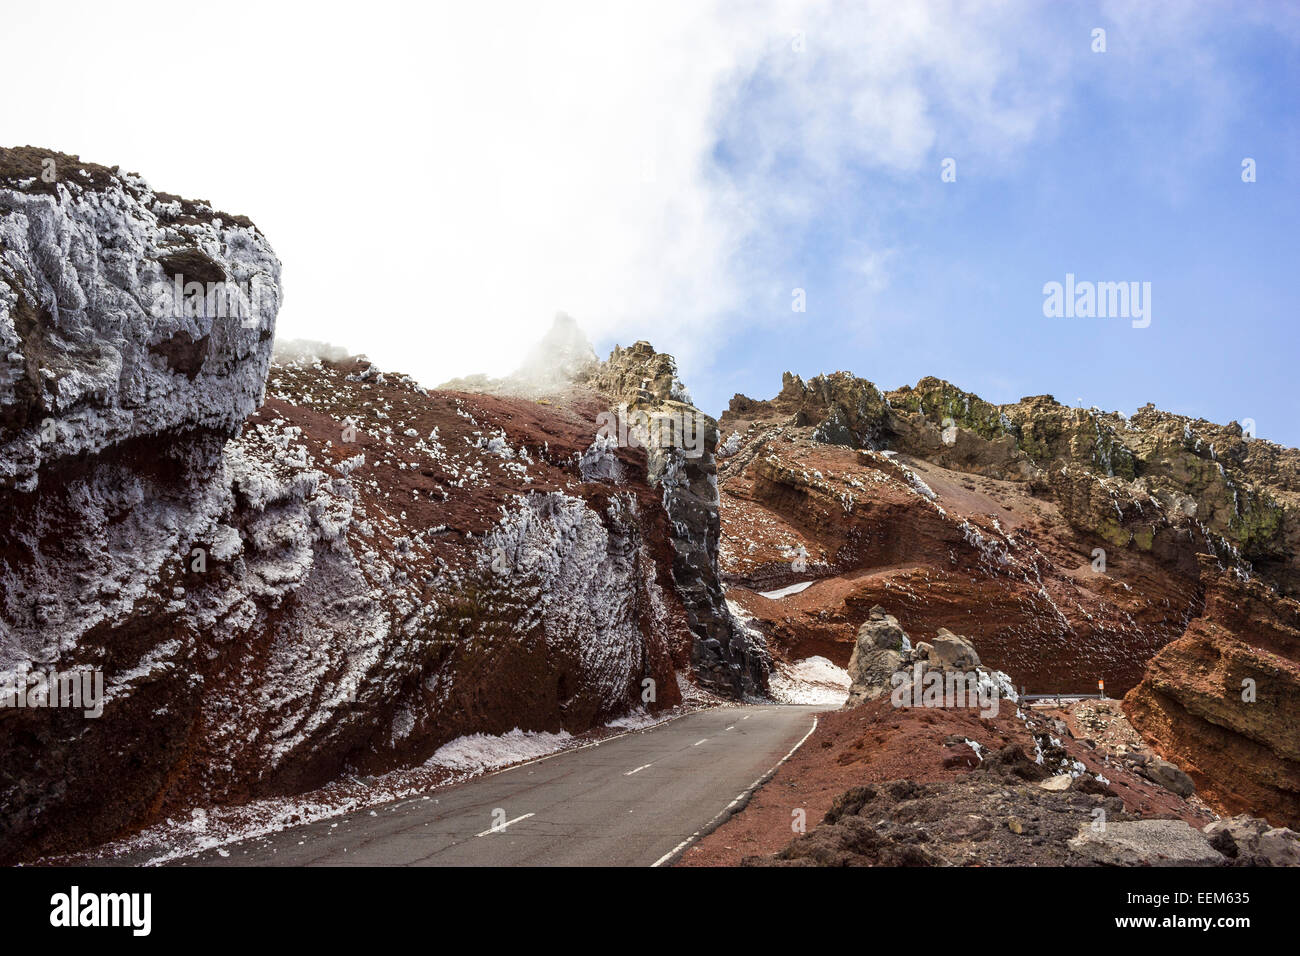 Road to the Roque de los Muchachos, ice-covered volcanic rocks, fog, La Palma, Canary Islands, Spain Stock Photo